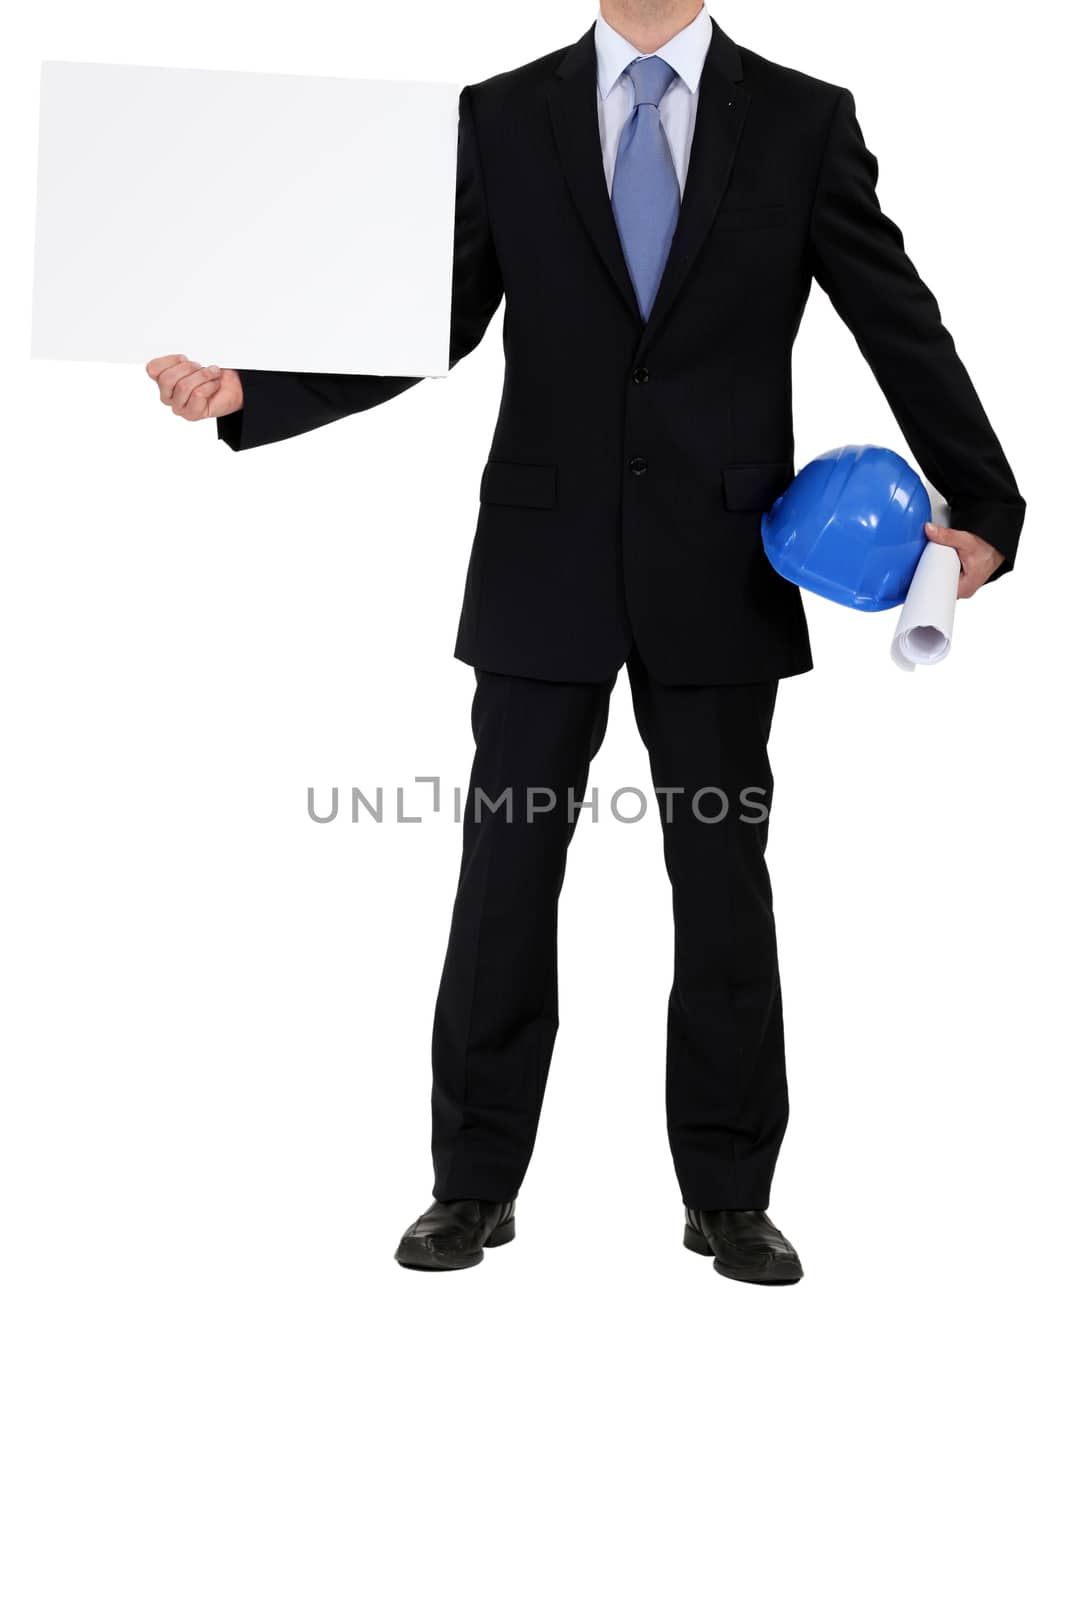 Architect holding blank poster